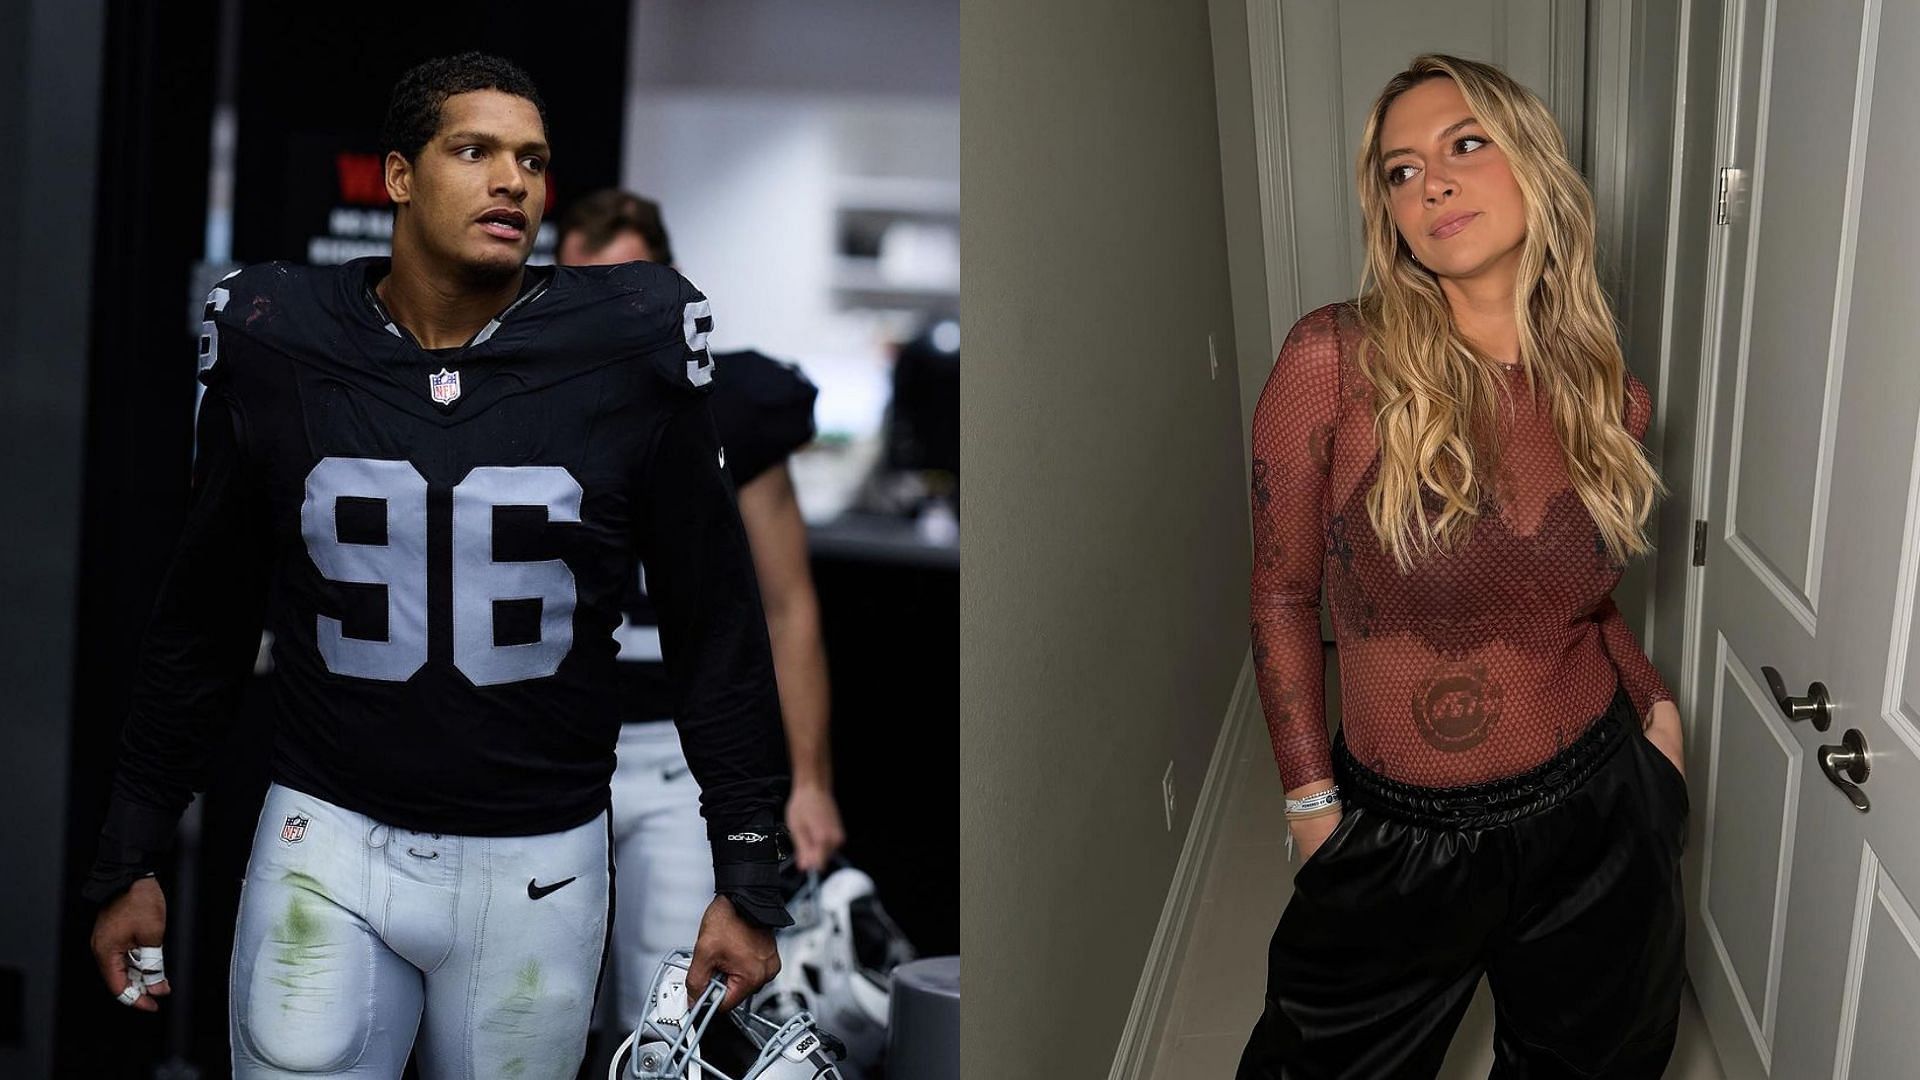 Isaac Rochell has not retired, according to his wife Allison Kuch